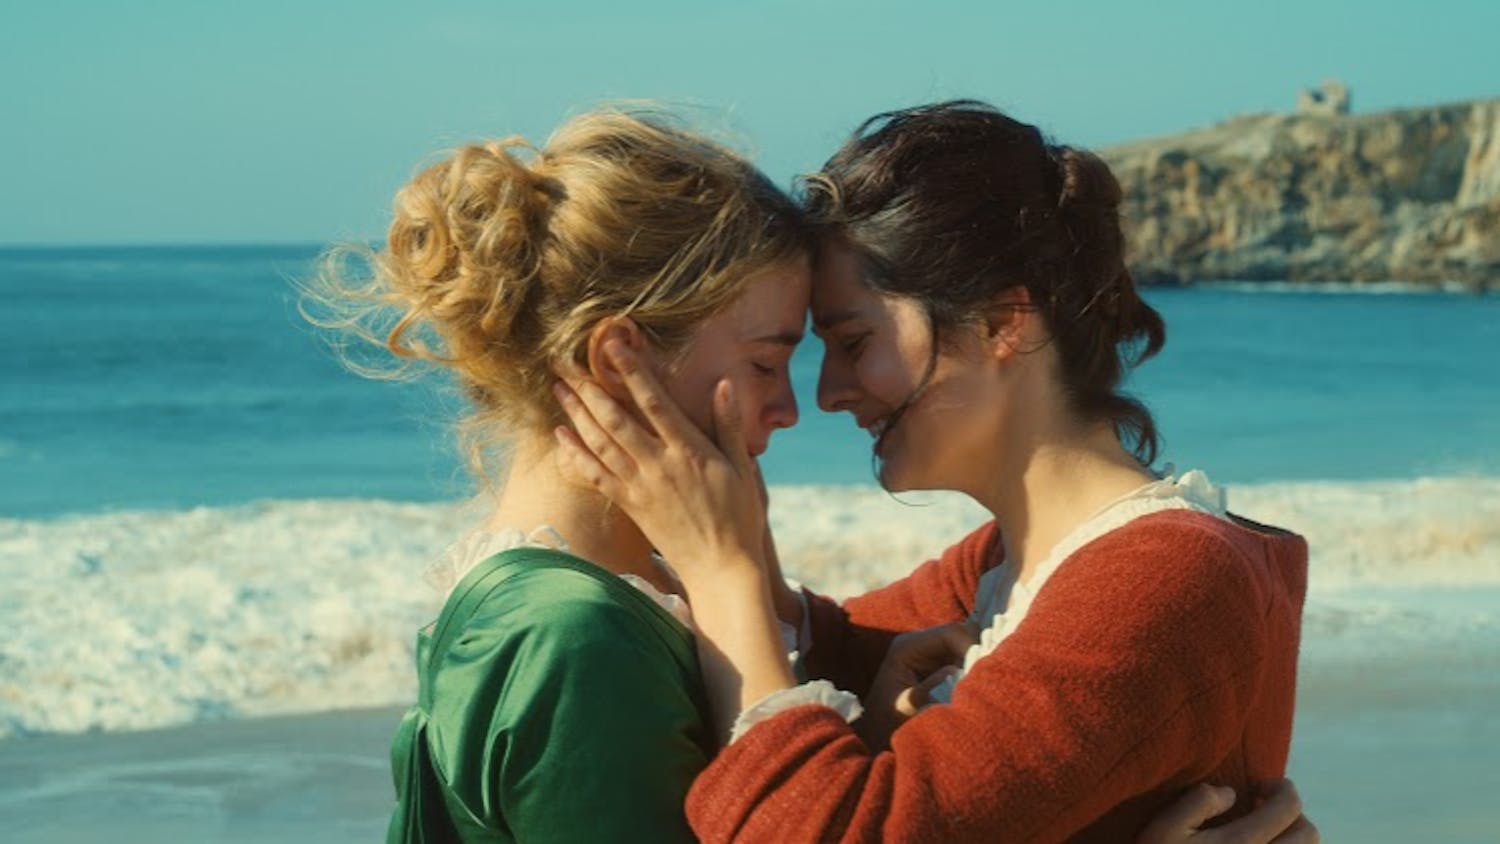 Adèle Haenel as Héloïse, left, and Noémie Merlant as Marianne play two star-crossed lovers in “Portrait of a Lady on Fire,” directed by Céline Sciamma.
&nbsp;
&nbsp;